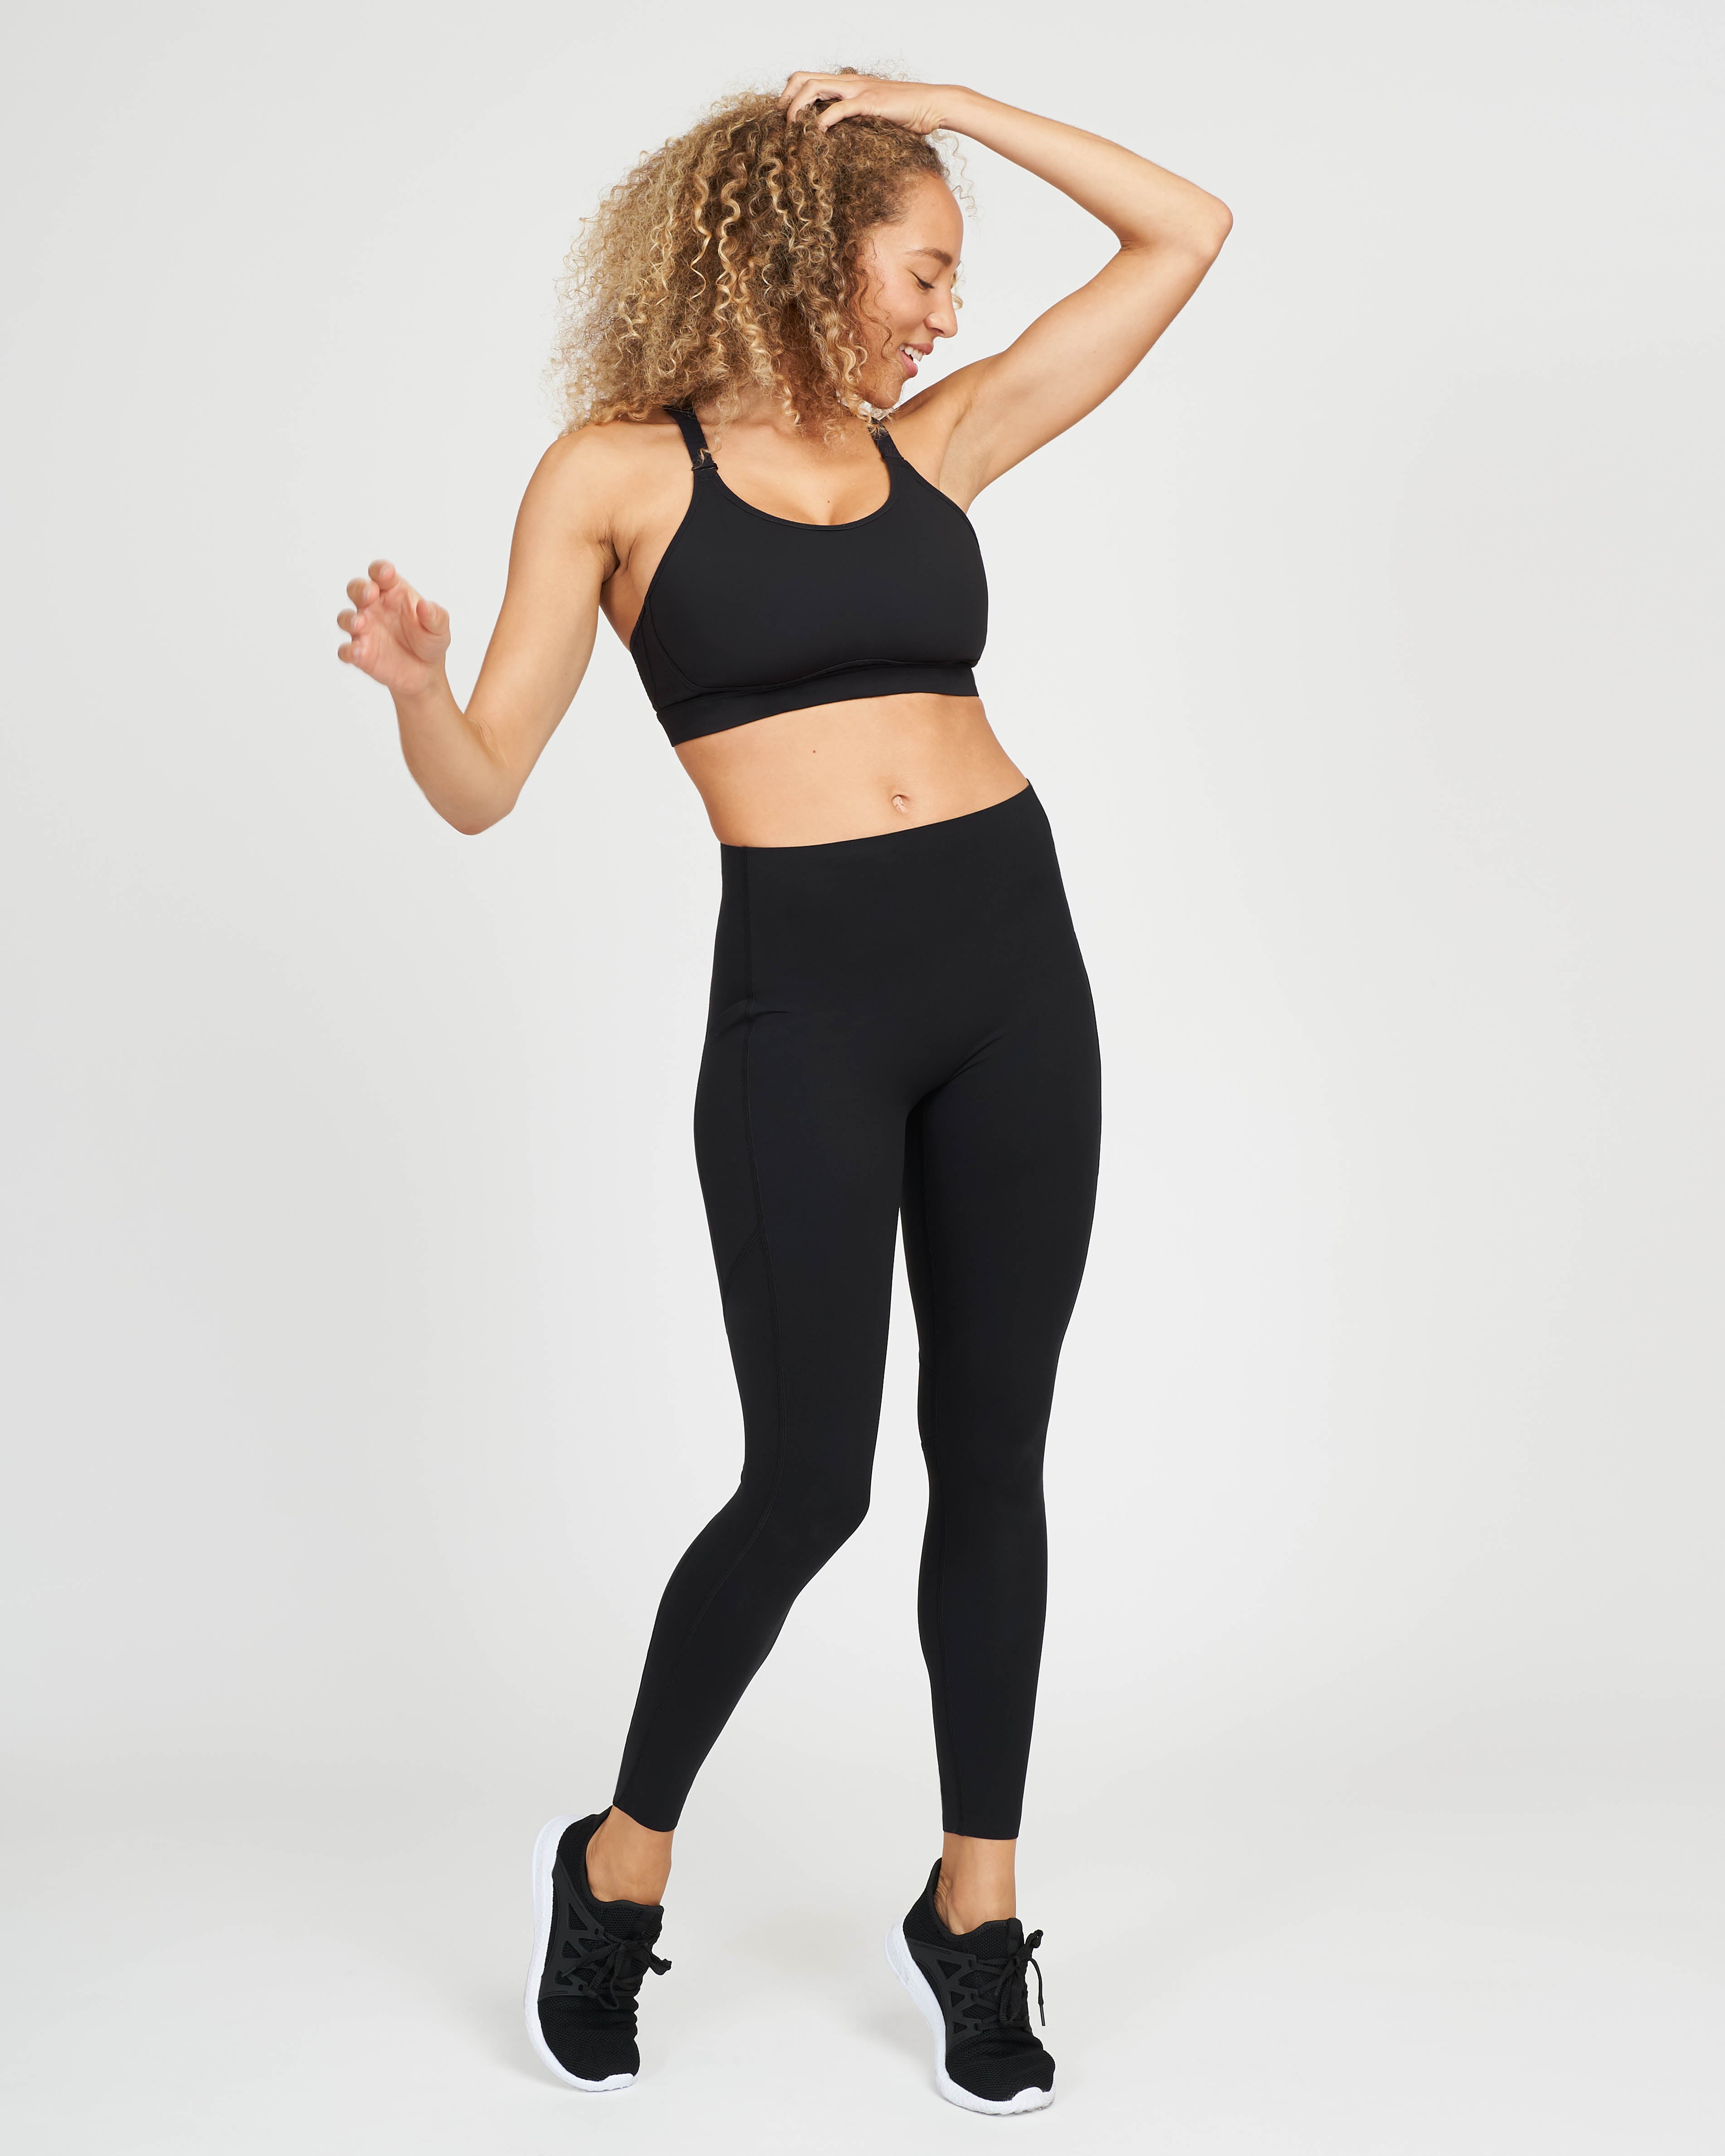 SPANX - Current obsession: Seamless leggings! Our Look At Me Now Seamless  leggings are ultra-comfy, supportive and flattering. Shop these ultra-comfy seamless  leggings:  🙌 #Spanx #Spanxleggings #seamlessleggings